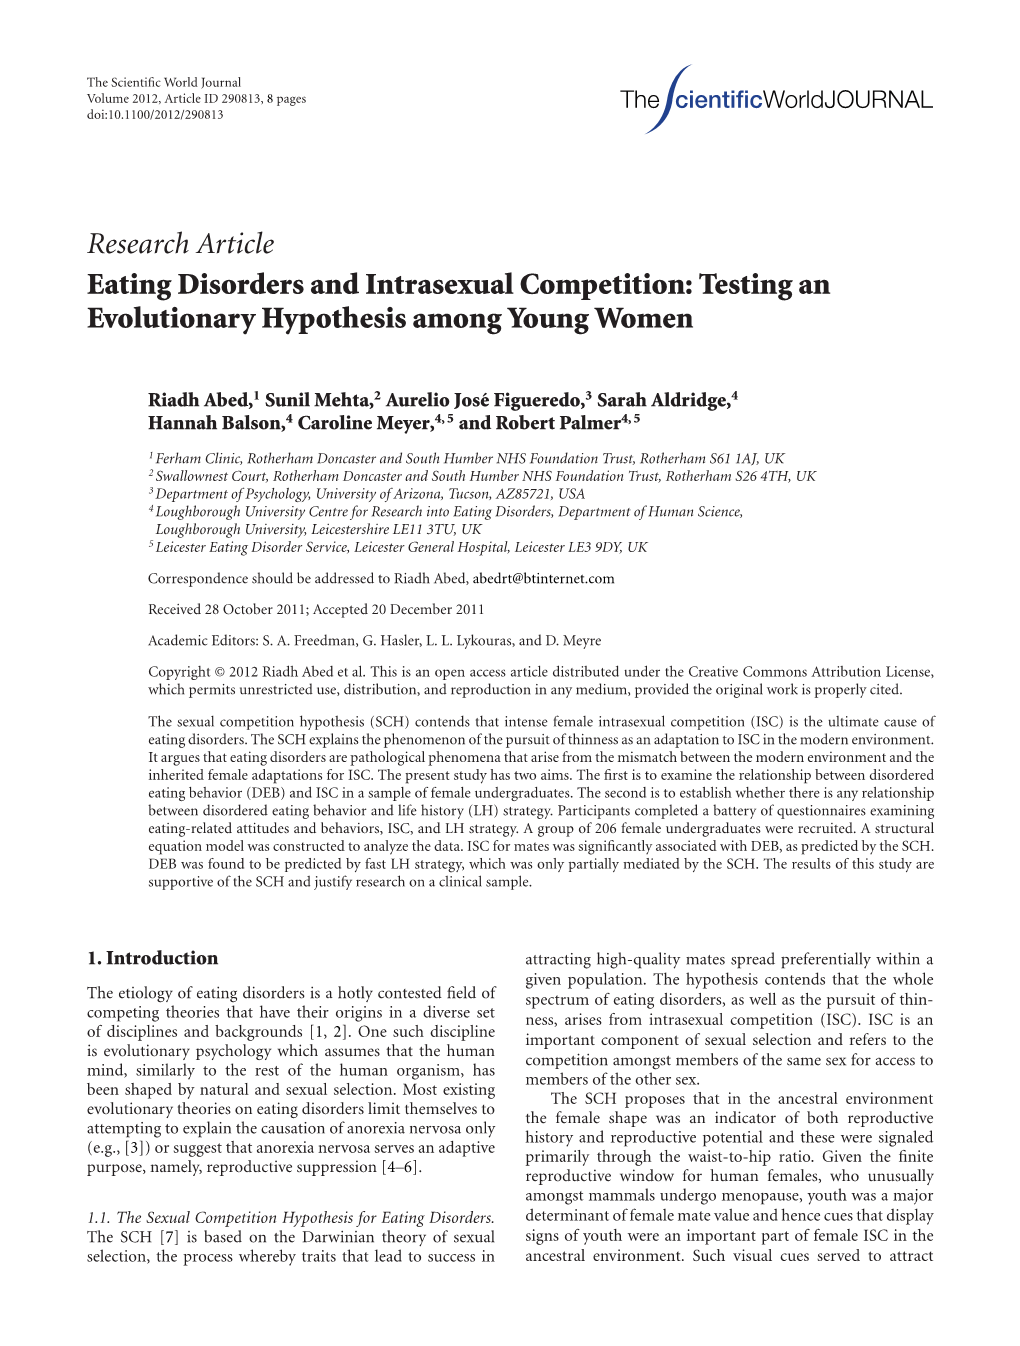 Research Article Eating Disorders and Intrasexual Competition: Testing an Evolutionary Hypothesis Among Young Women